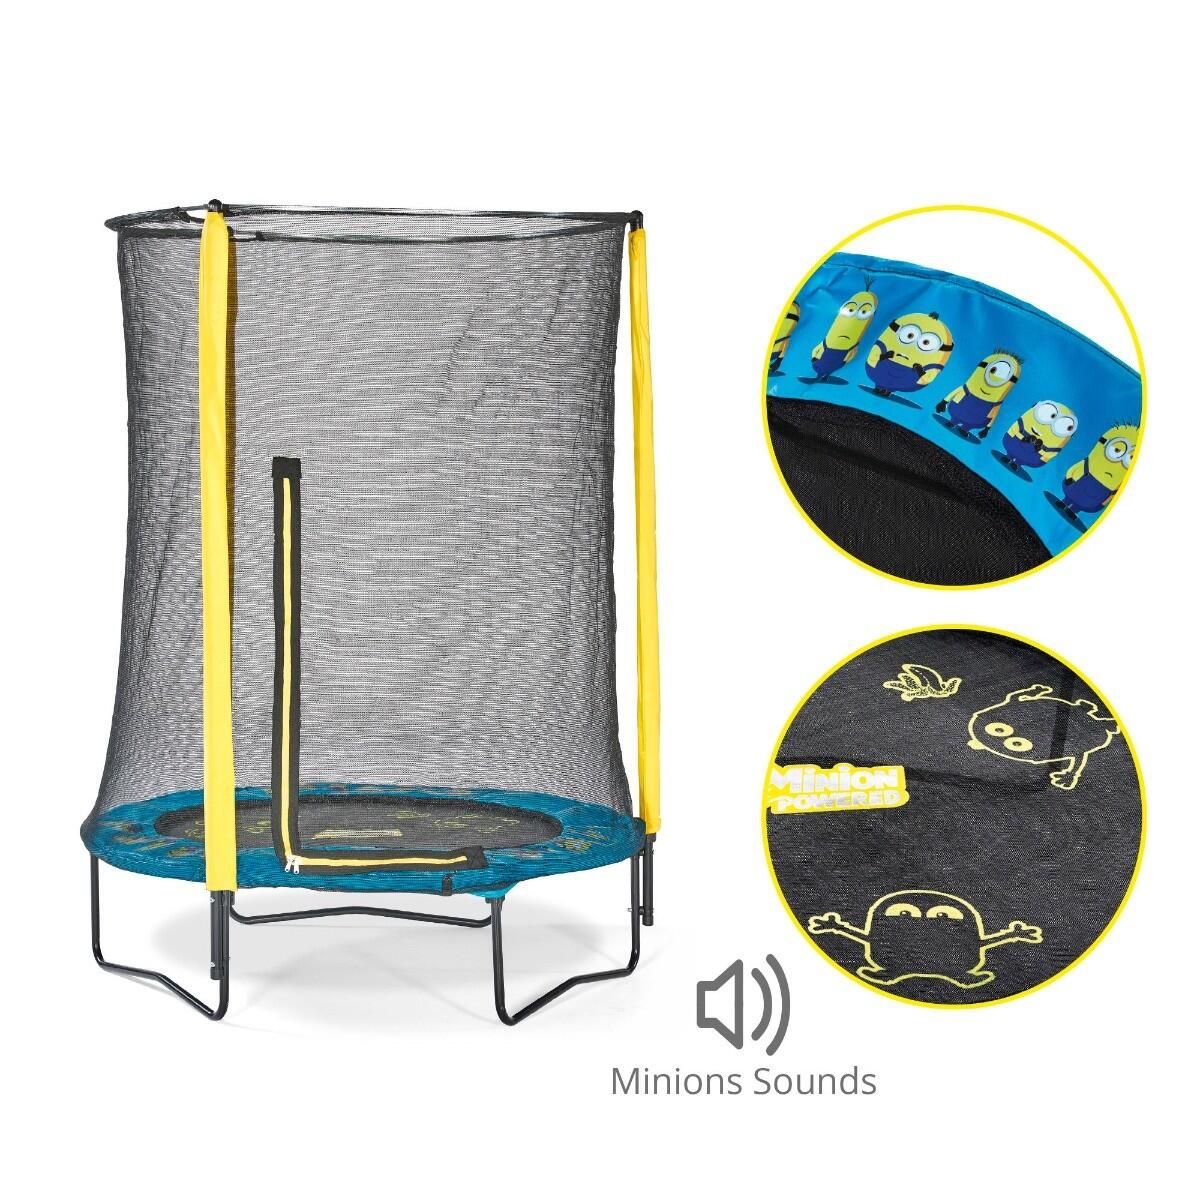 Plum Minions 4.5ft Minions Trampoline and Enclosure with Sounds 2/5